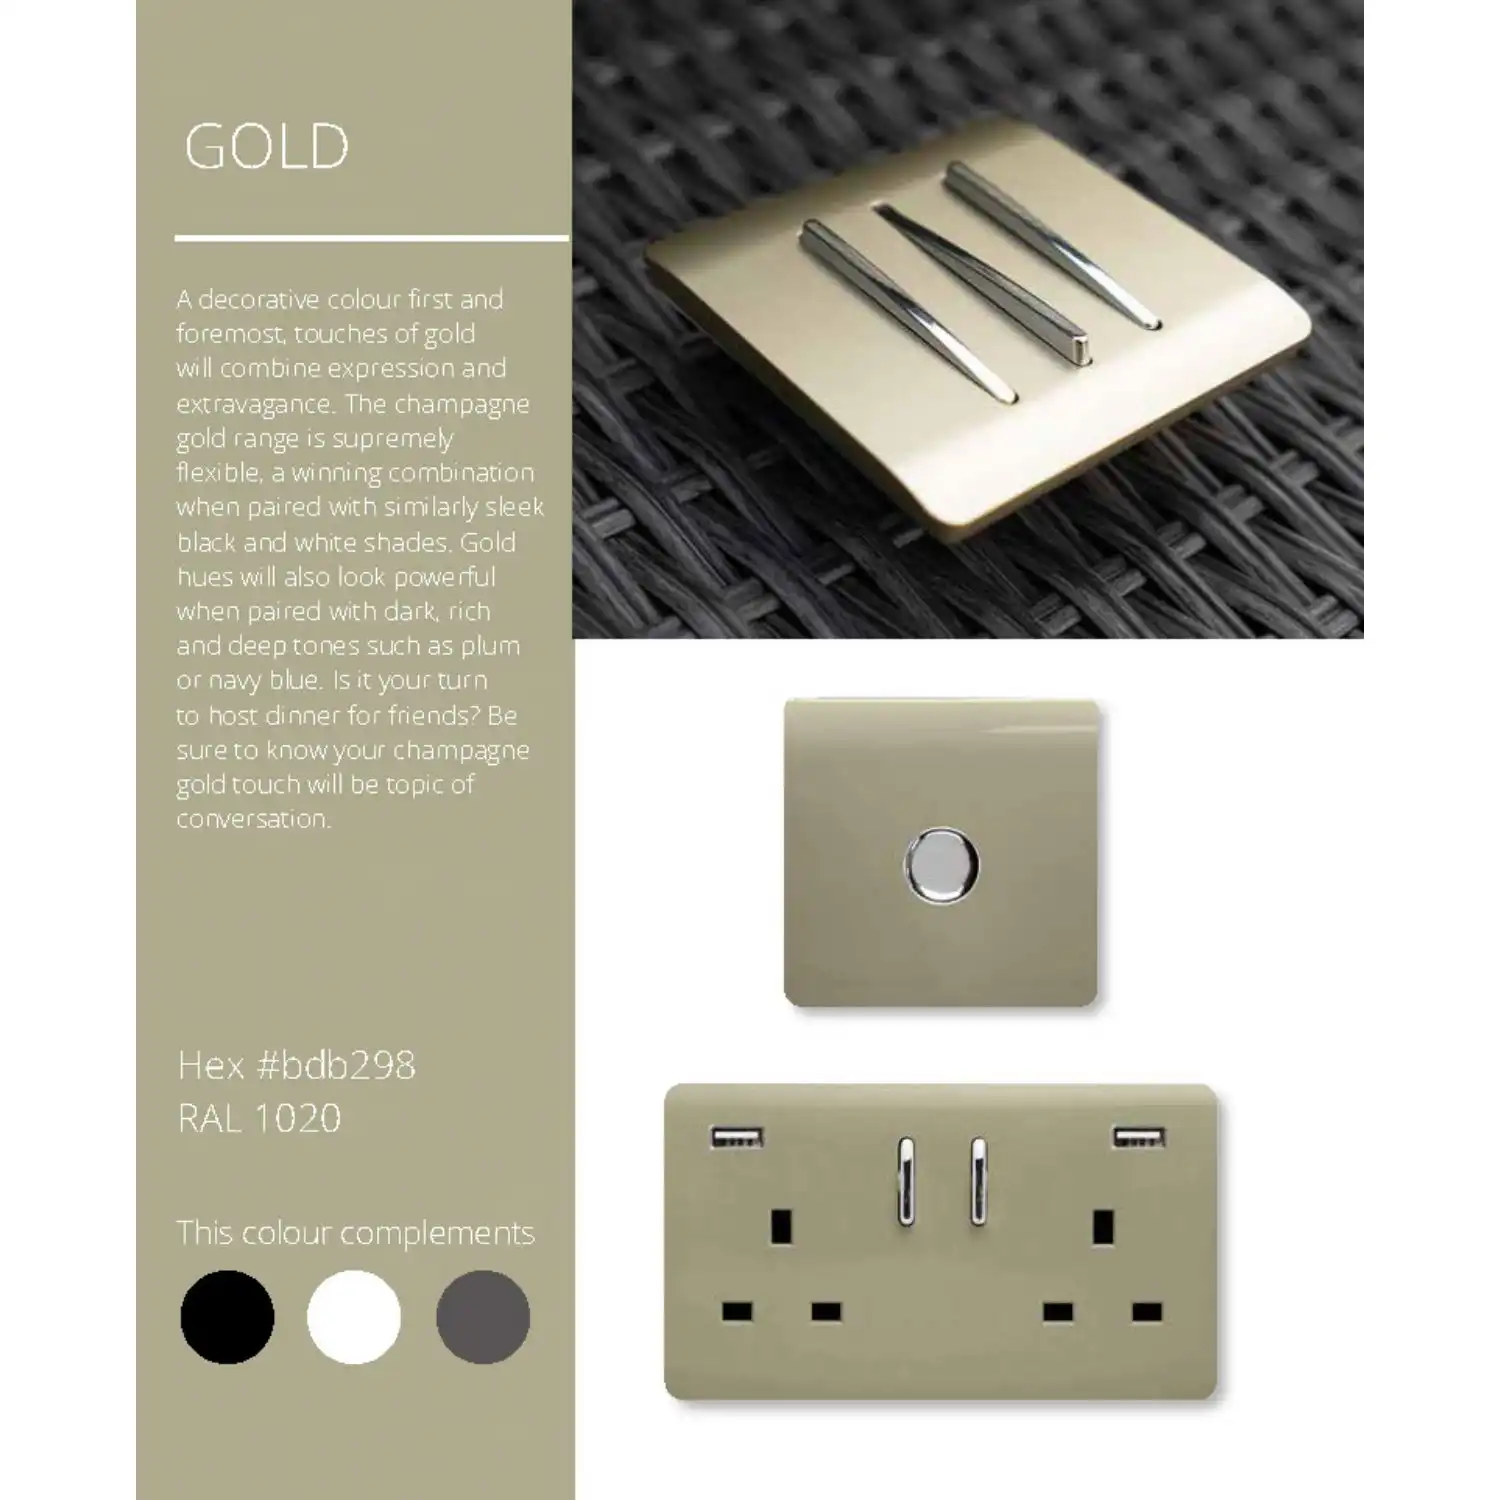 Trendi, Artistic Modern 1 Gang Retractive Home Auto.Switch Champagne Gold Finish, BRITISH MADE, (25mm Back Box Required), 5yrs Warranty